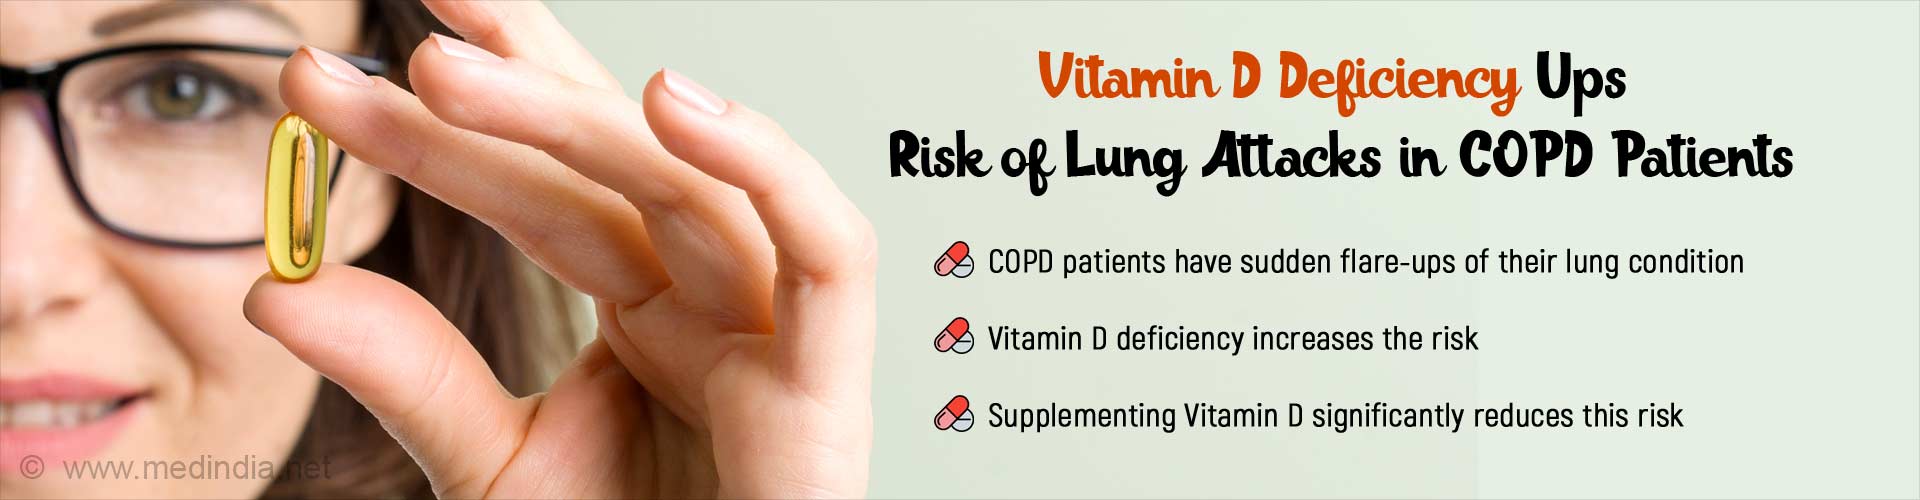 Vitamin D deficiency ups risk of lung attacks in patients. COPD patients have sudden flare-ups of their lung condition. Vitamin D deficiency increases the risk. Supplementing Vitamin D significantly reduces this risk.